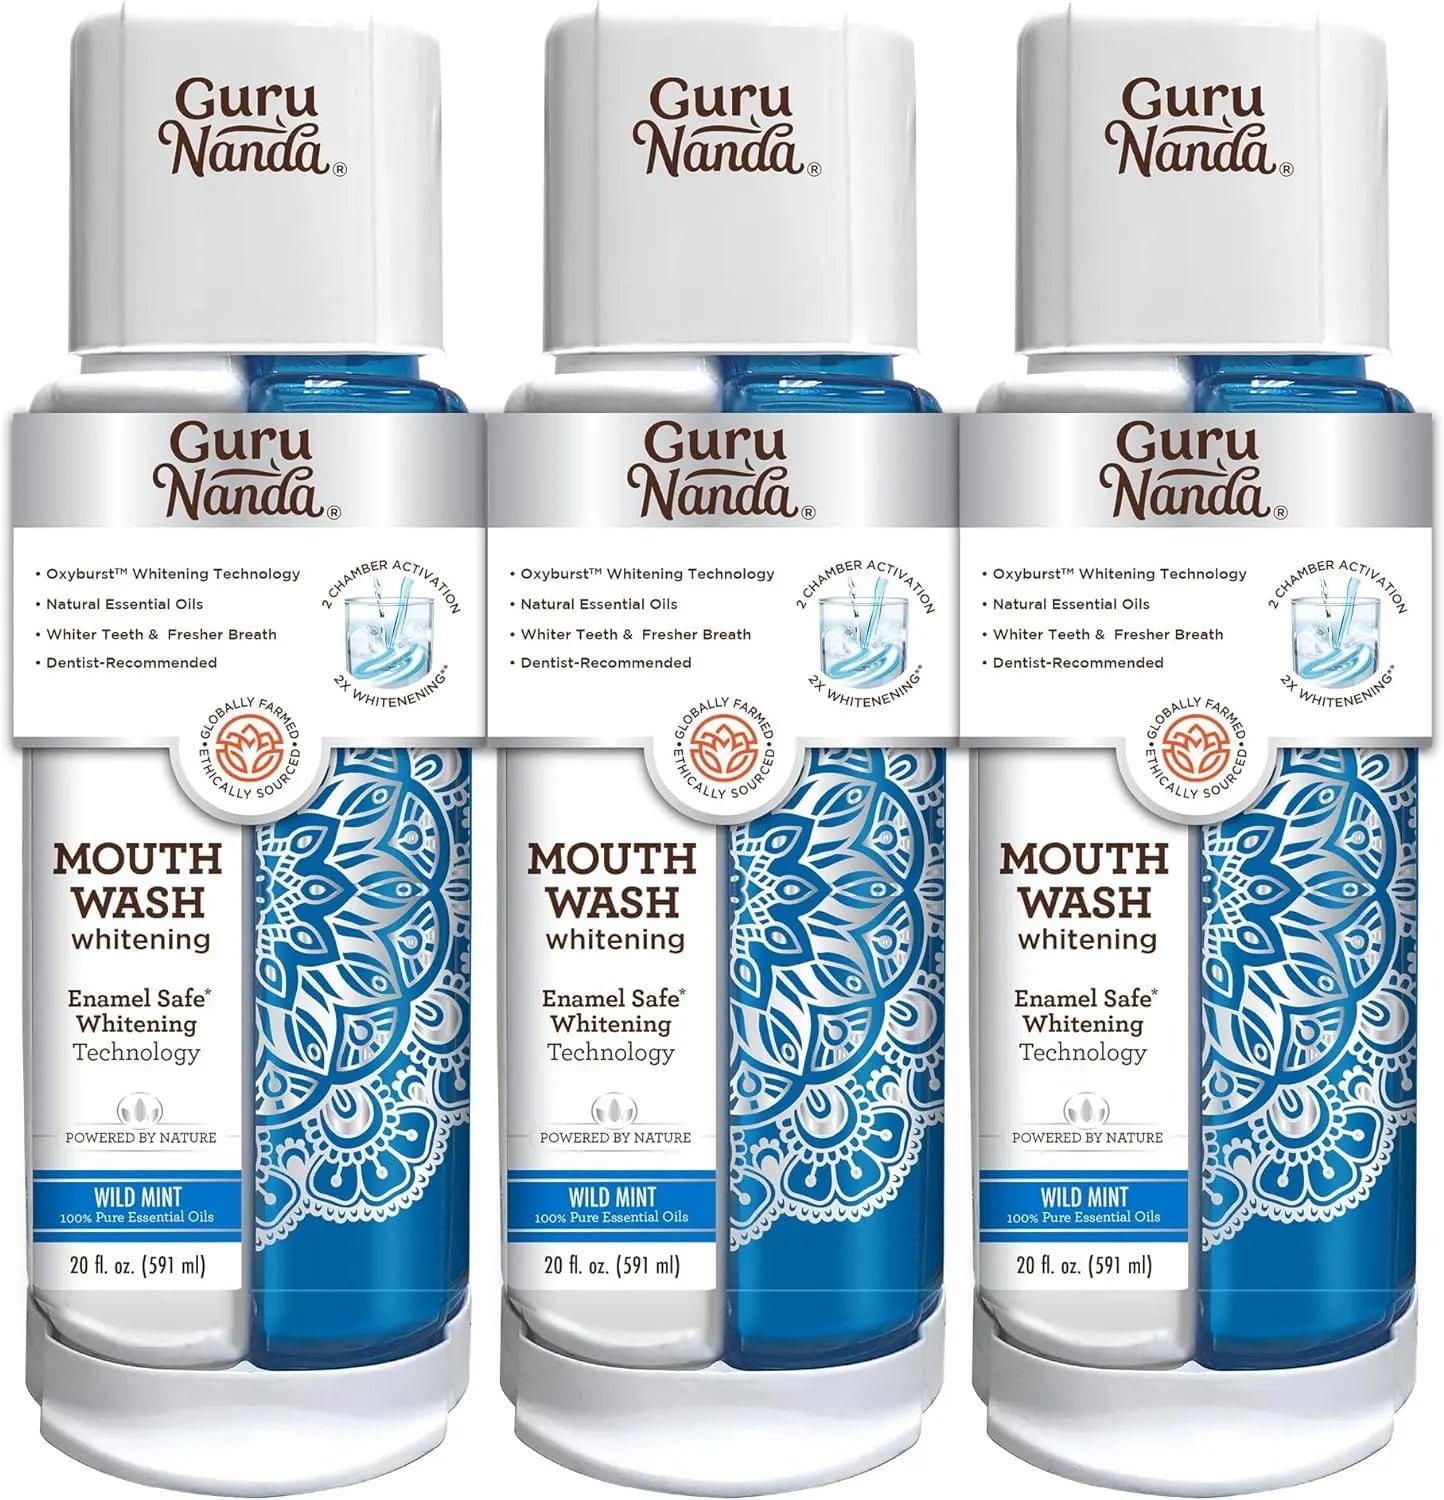 GuruNanda Dual Barrel Oxyburst Whitening Mouthwash - Contains Hydrogen Peroxide to Promote Whiter Teeth - Alcohol & Fluoride Free Rinse with 100% Natural Essential Oils, Wild Mint Flavor - 20 Flz Oz